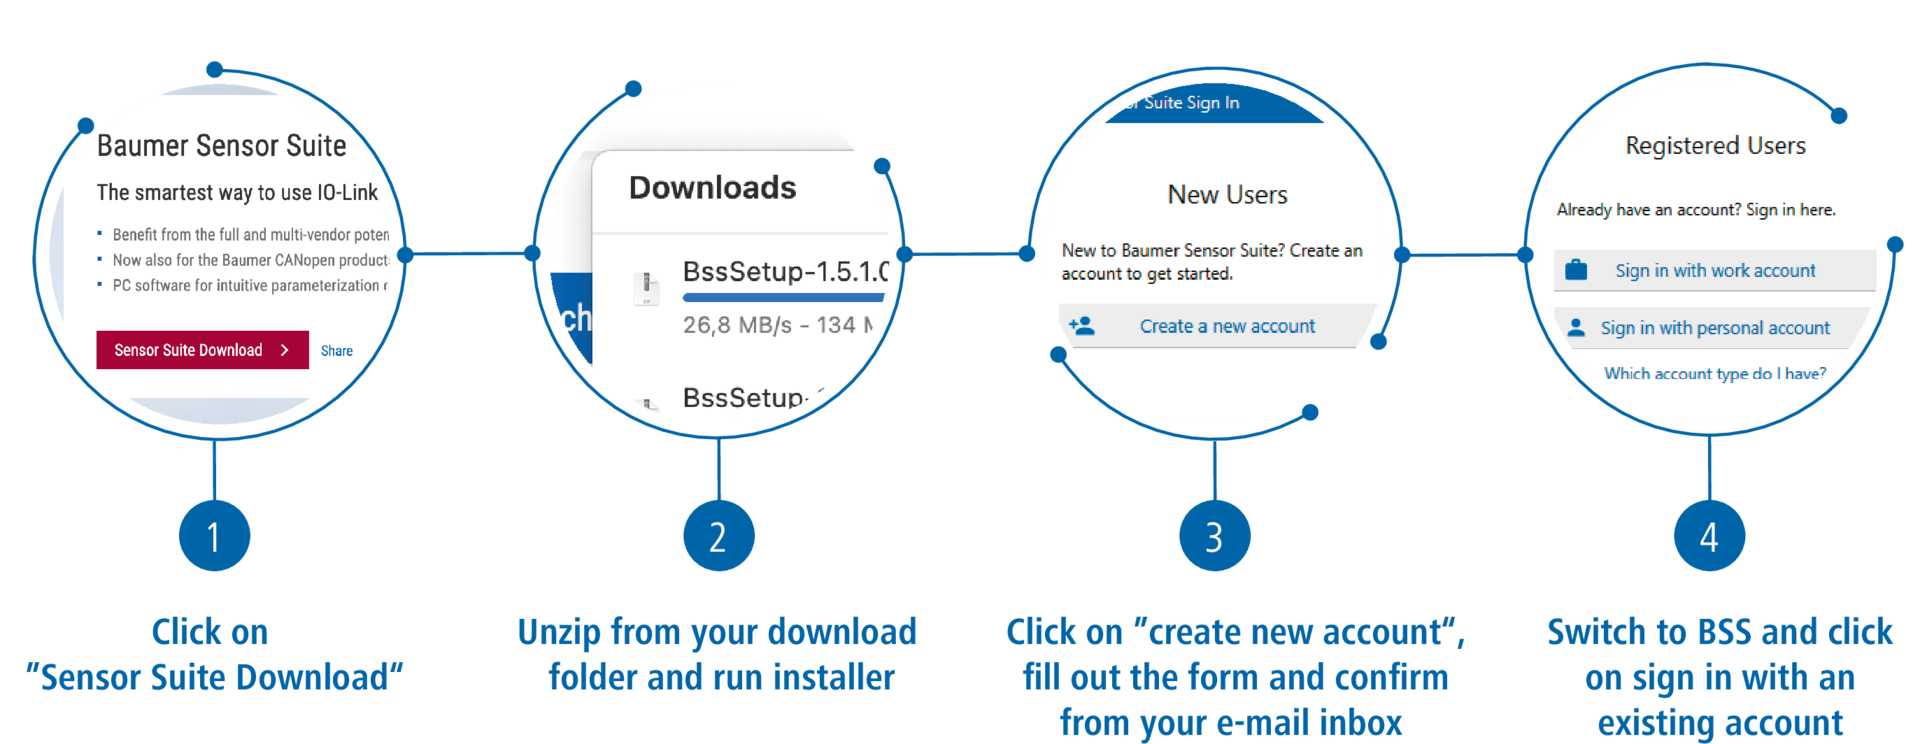 How to install and register the Baumer Sensor Suite